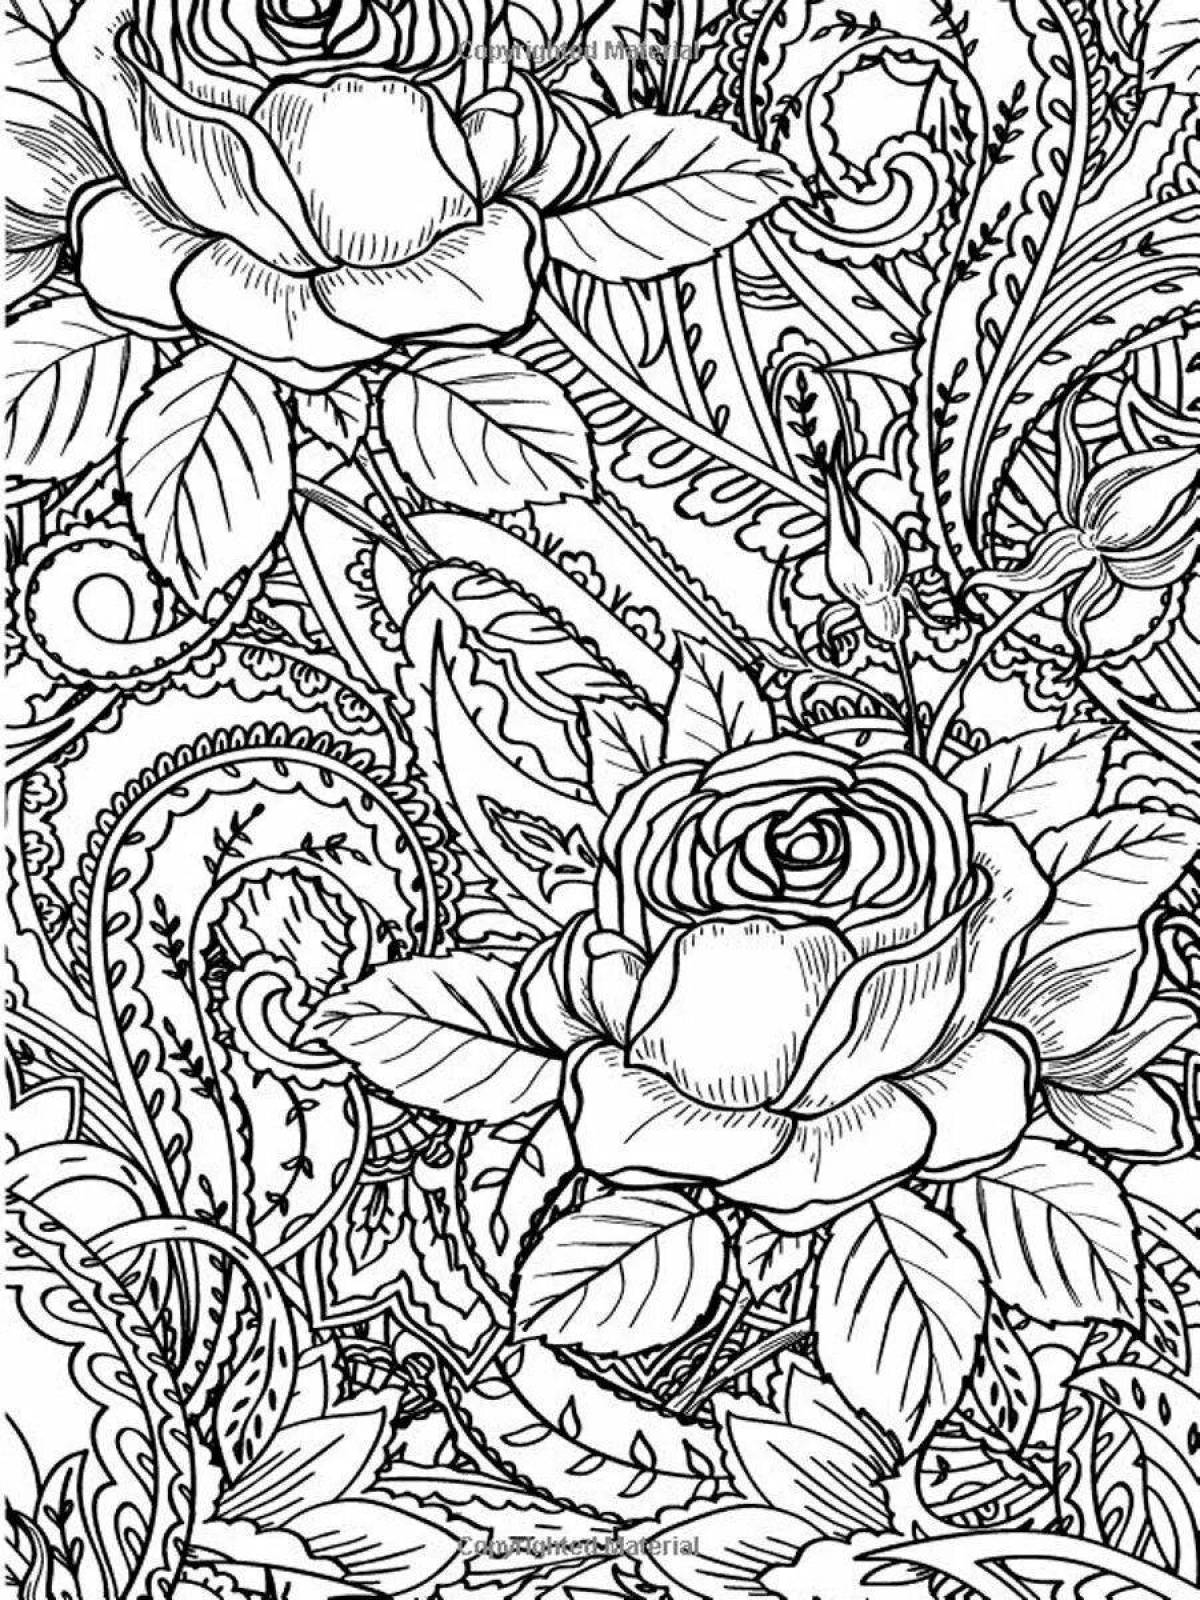 Amazing coloring pages for adults ru beautiful